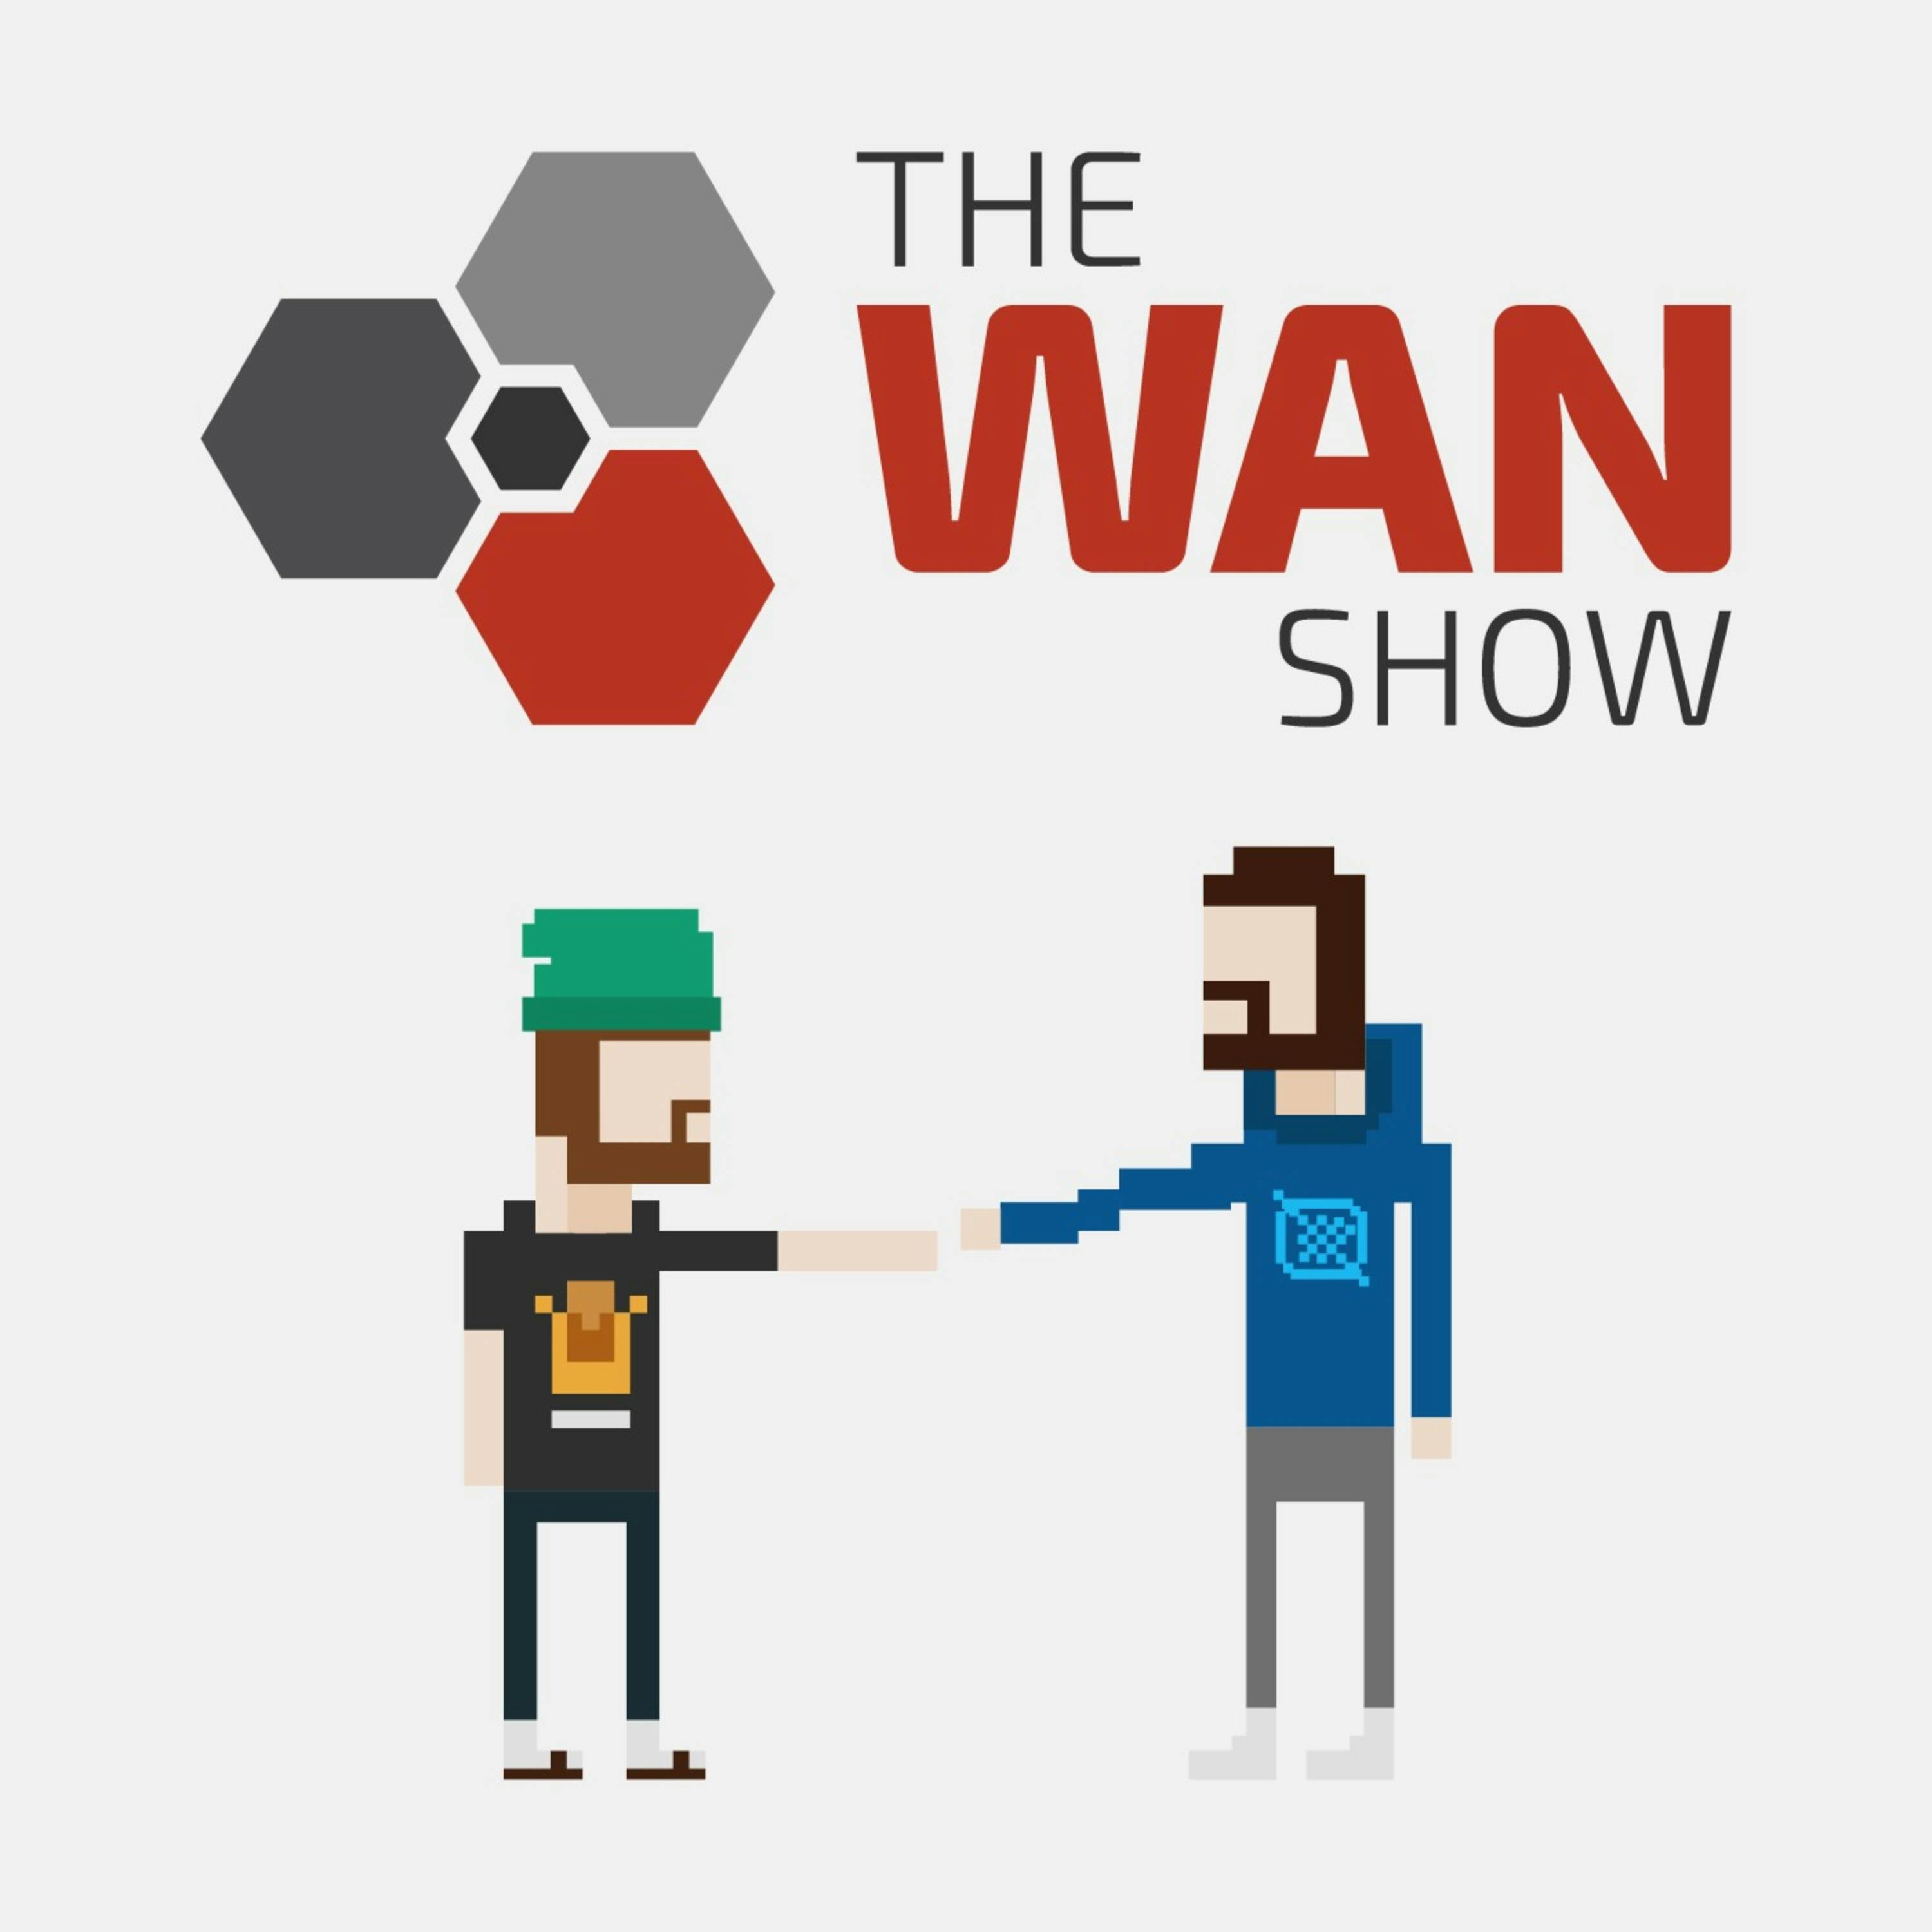 Apple HULK SMASHES the Competition - WAN Show April 23, 2021